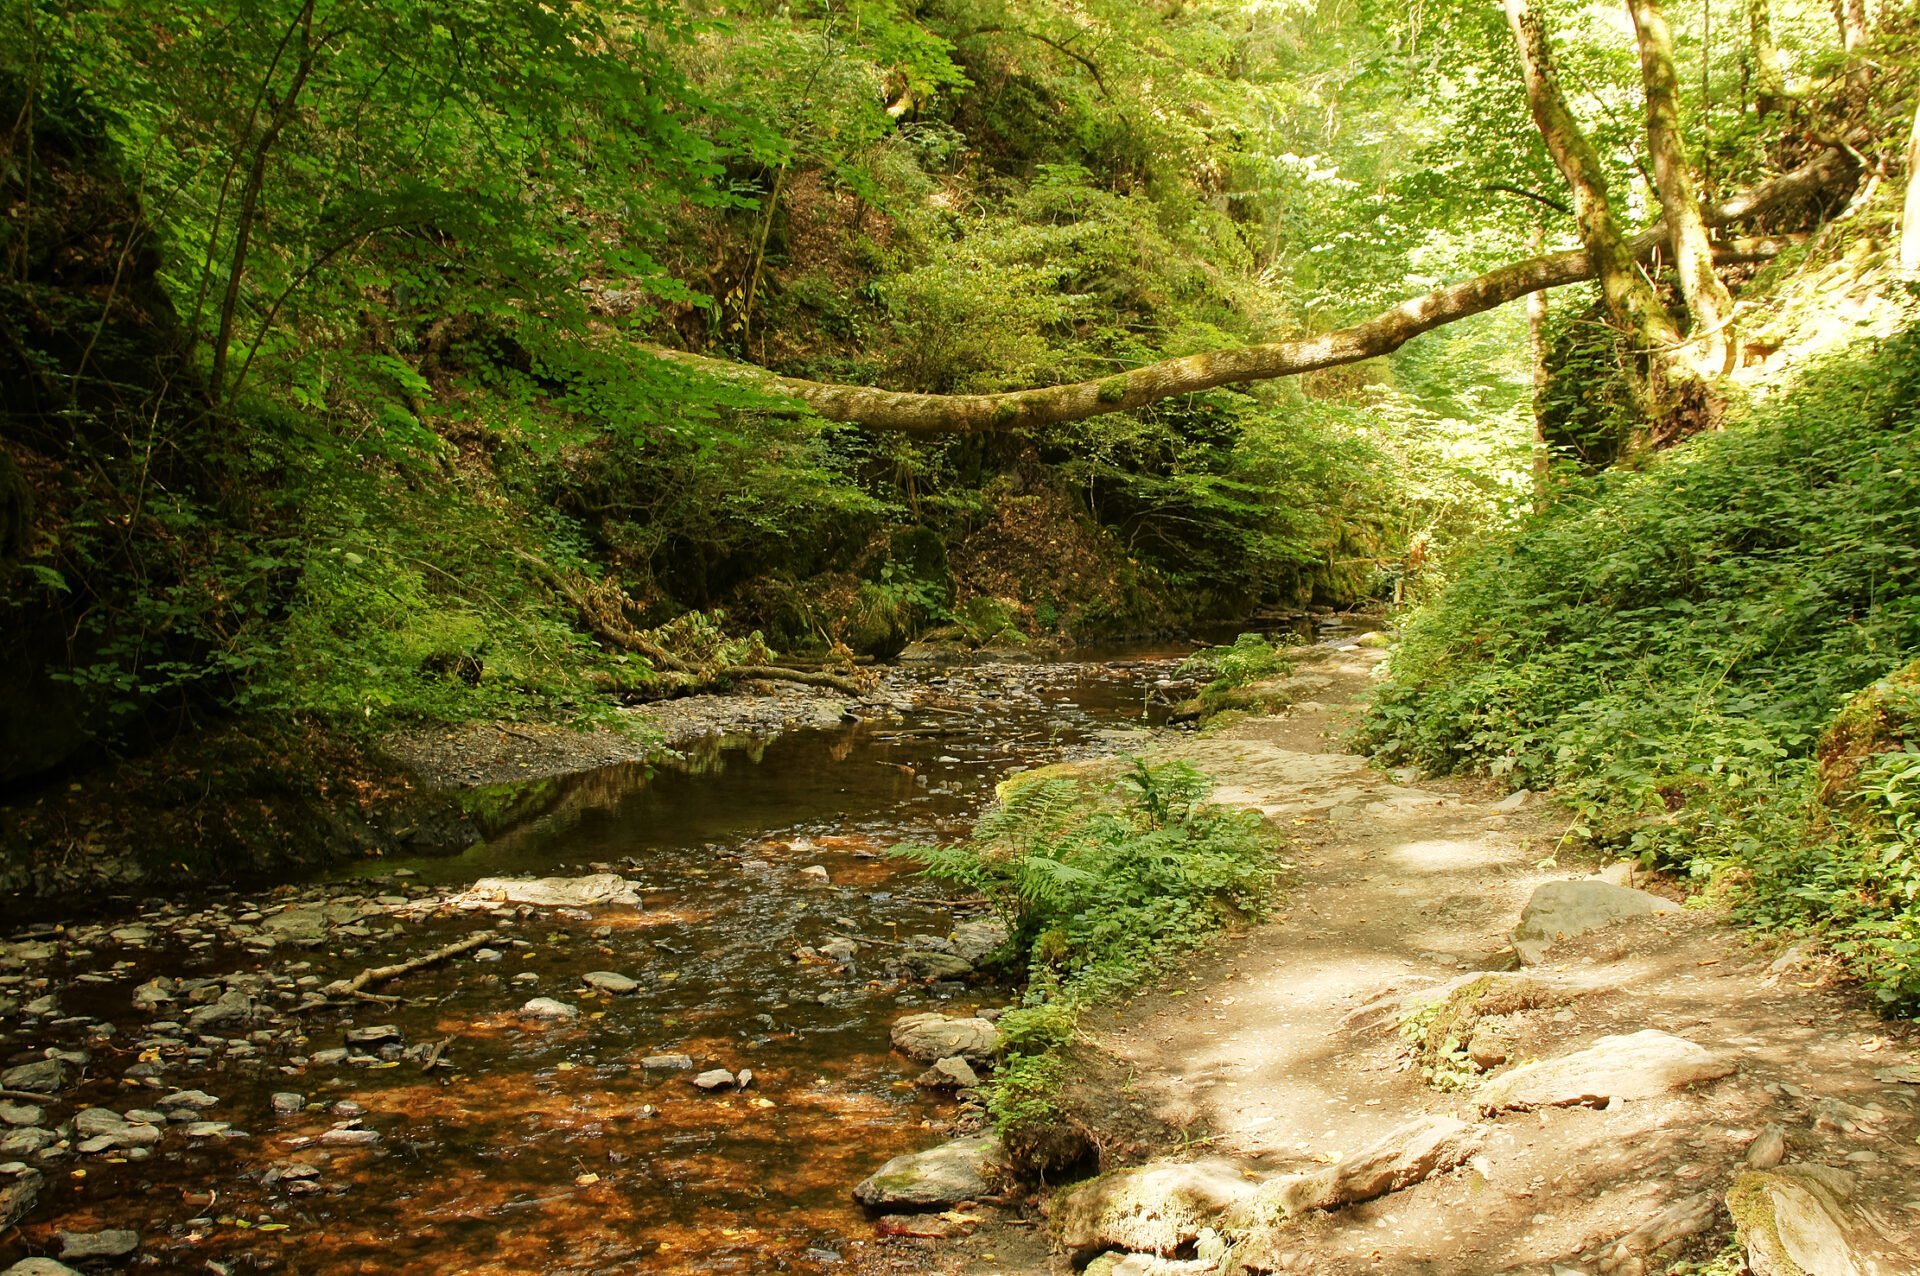 A serene woodland scene with a clear stream flanked by lush greenery and a dirt path running alongside it.